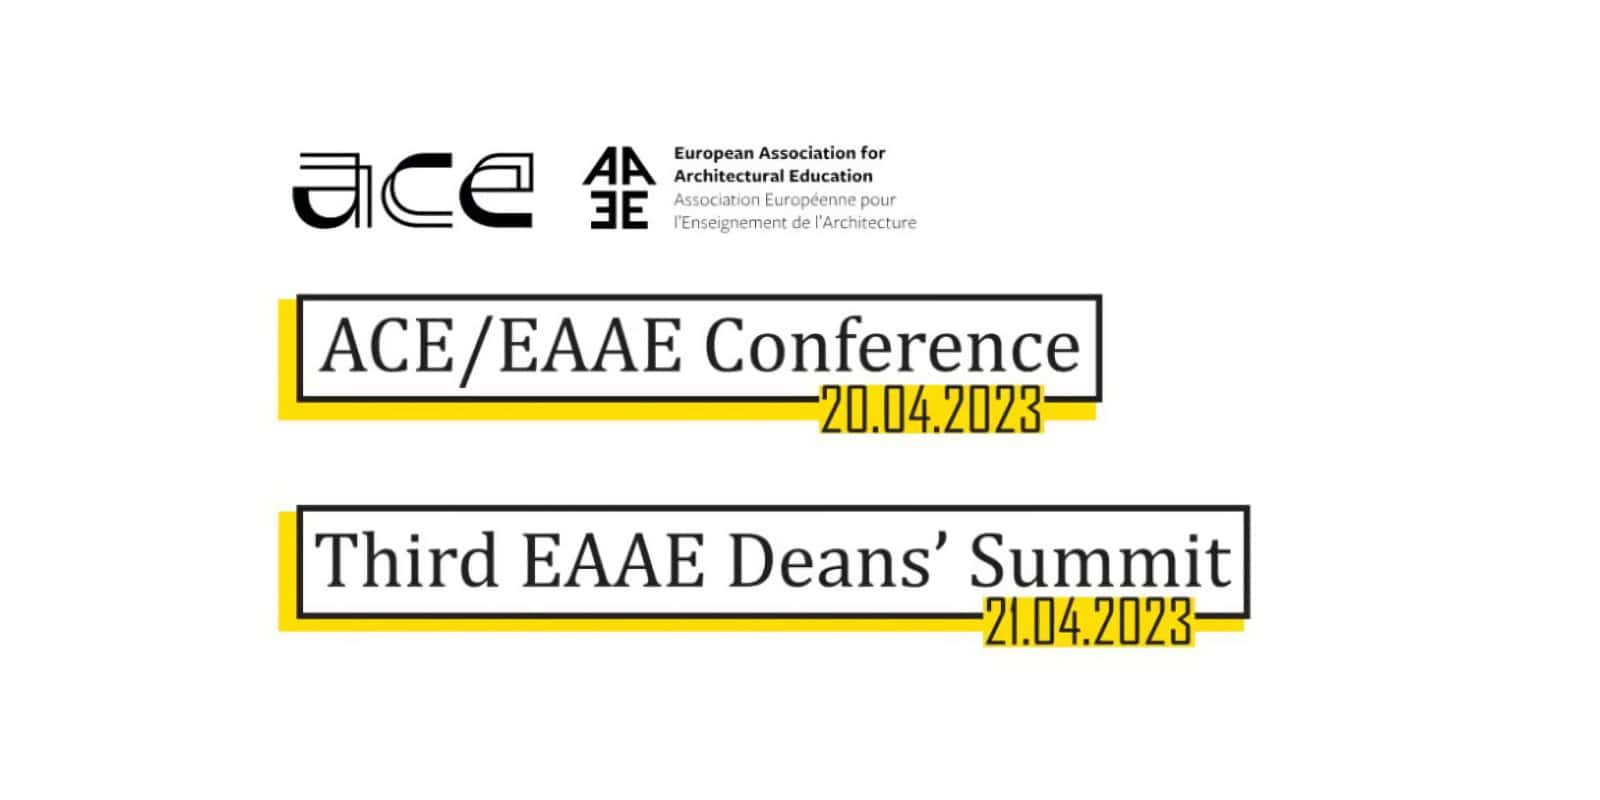 ACE/EAAE Conference & Third EAAE Deans’ Summit